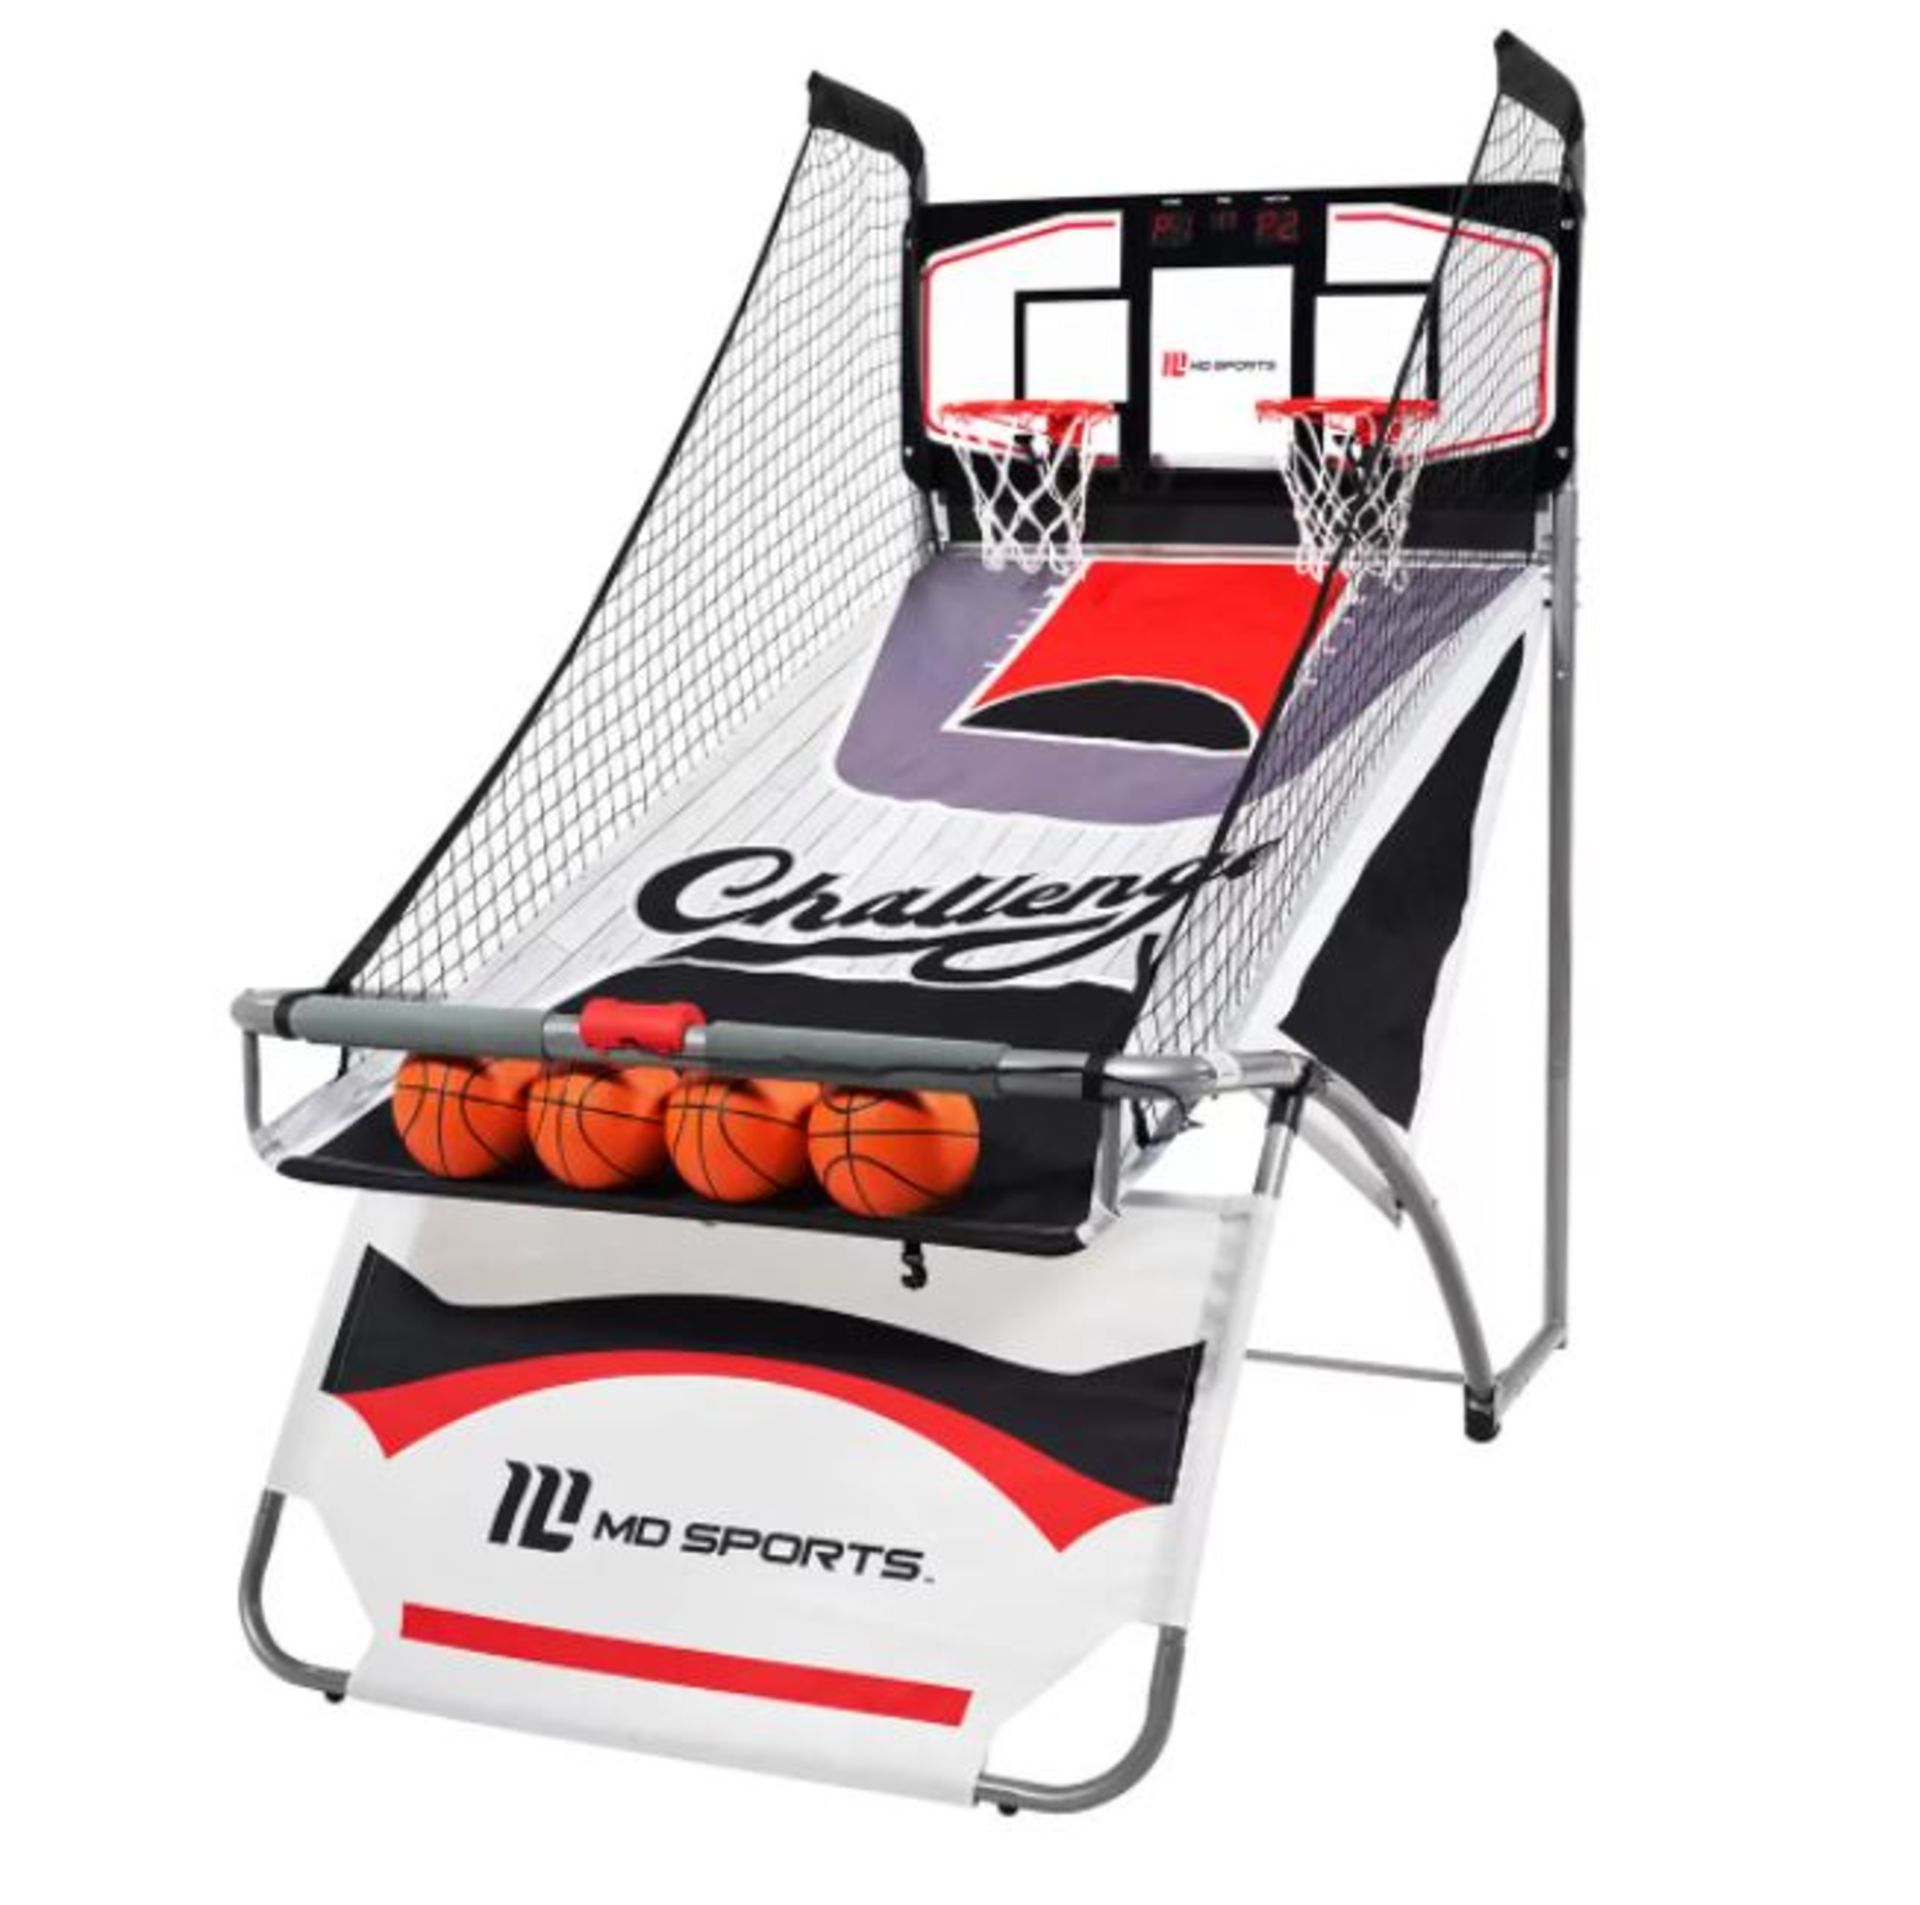 1 BOXED MD SPORTS 2 PLAYER BASKETBALL ARCADE GAME RRP Â£249 (PICTURES FOR ILLUSTRATION PURPOSES